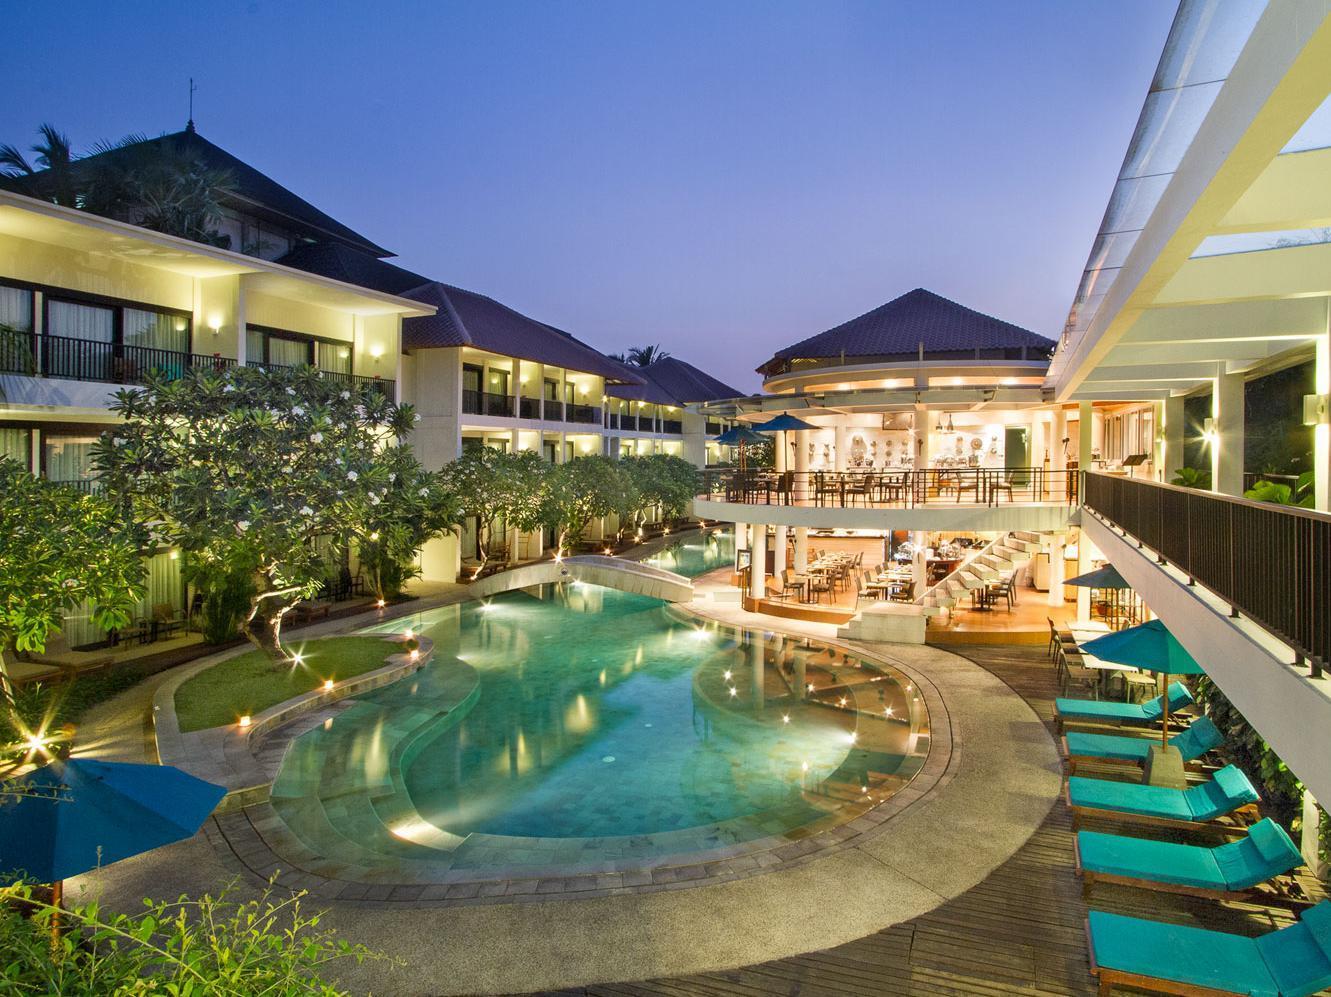 Radisson Bali Legian Camakila Bali District FAQ 2016, What facilities are there in Radisson Bali Legian Camakila Bali District 2016, What Languages Spoken are Supported in Radisson Bali Legian Camakila Bali District 2016, Which payment cards are accepted in Radisson Bali Legian Camakila Bali District , Bali District Radisson Bali Legian Camakila room facilities and services Q&A 2016, Bali District Radisson Bali Legian Camakila online booking services 2016, Bali District Radisson Bali Legian Camakila address 2016, Bali District Radisson Bali Legian Camakila telephone number 2016,Bali District Radisson Bali Legian Camakila map 2016, Bali District Radisson Bali Legian Camakila traffic guide 2016, how to go Bali District Radisson Bali Legian Camakila, Bali District Radisson Bali Legian Camakila booking online 2016, Bali District Radisson Bali Legian Camakila room types 2016.